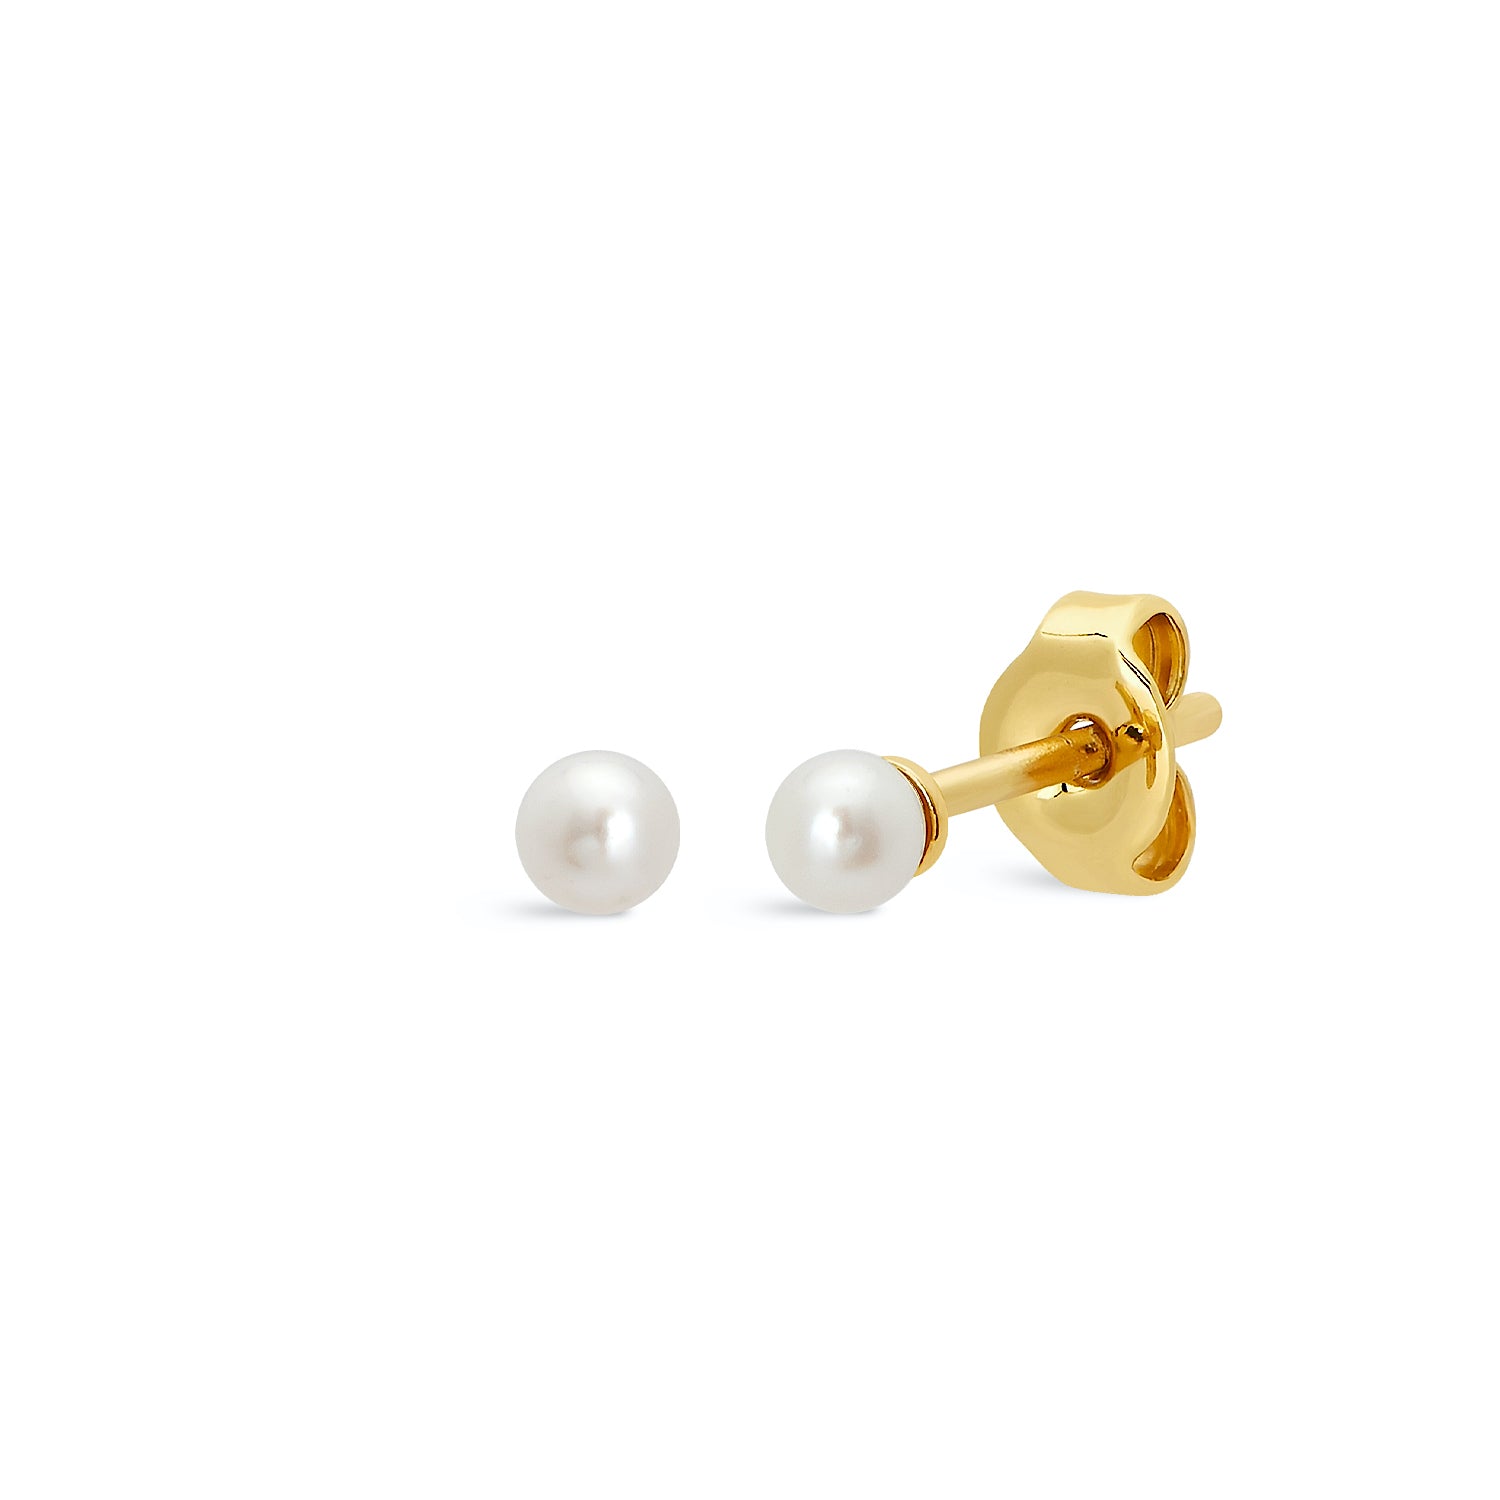 Chanel Gold Metal, Crystal, and Imitation Pearl CC Dangle Earrings, 2021, Fashion Earrings, Contemporary Jewelry (Like New)